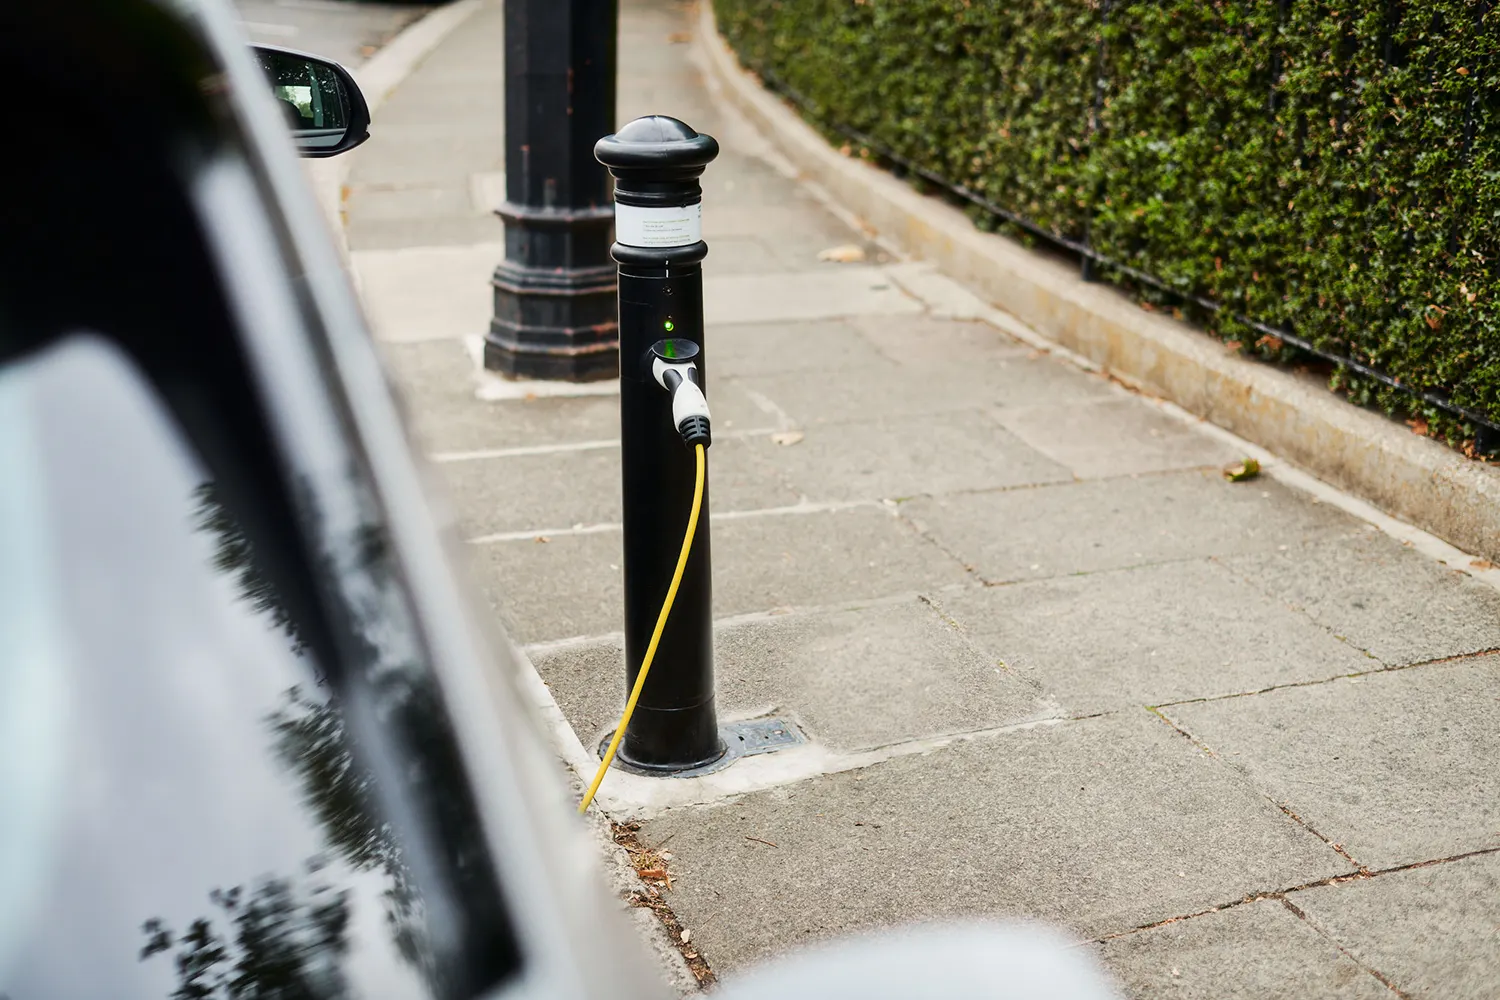 An electric vehicle is charging at a bollard from ubitricity, a company Siemens invested in in 2017.